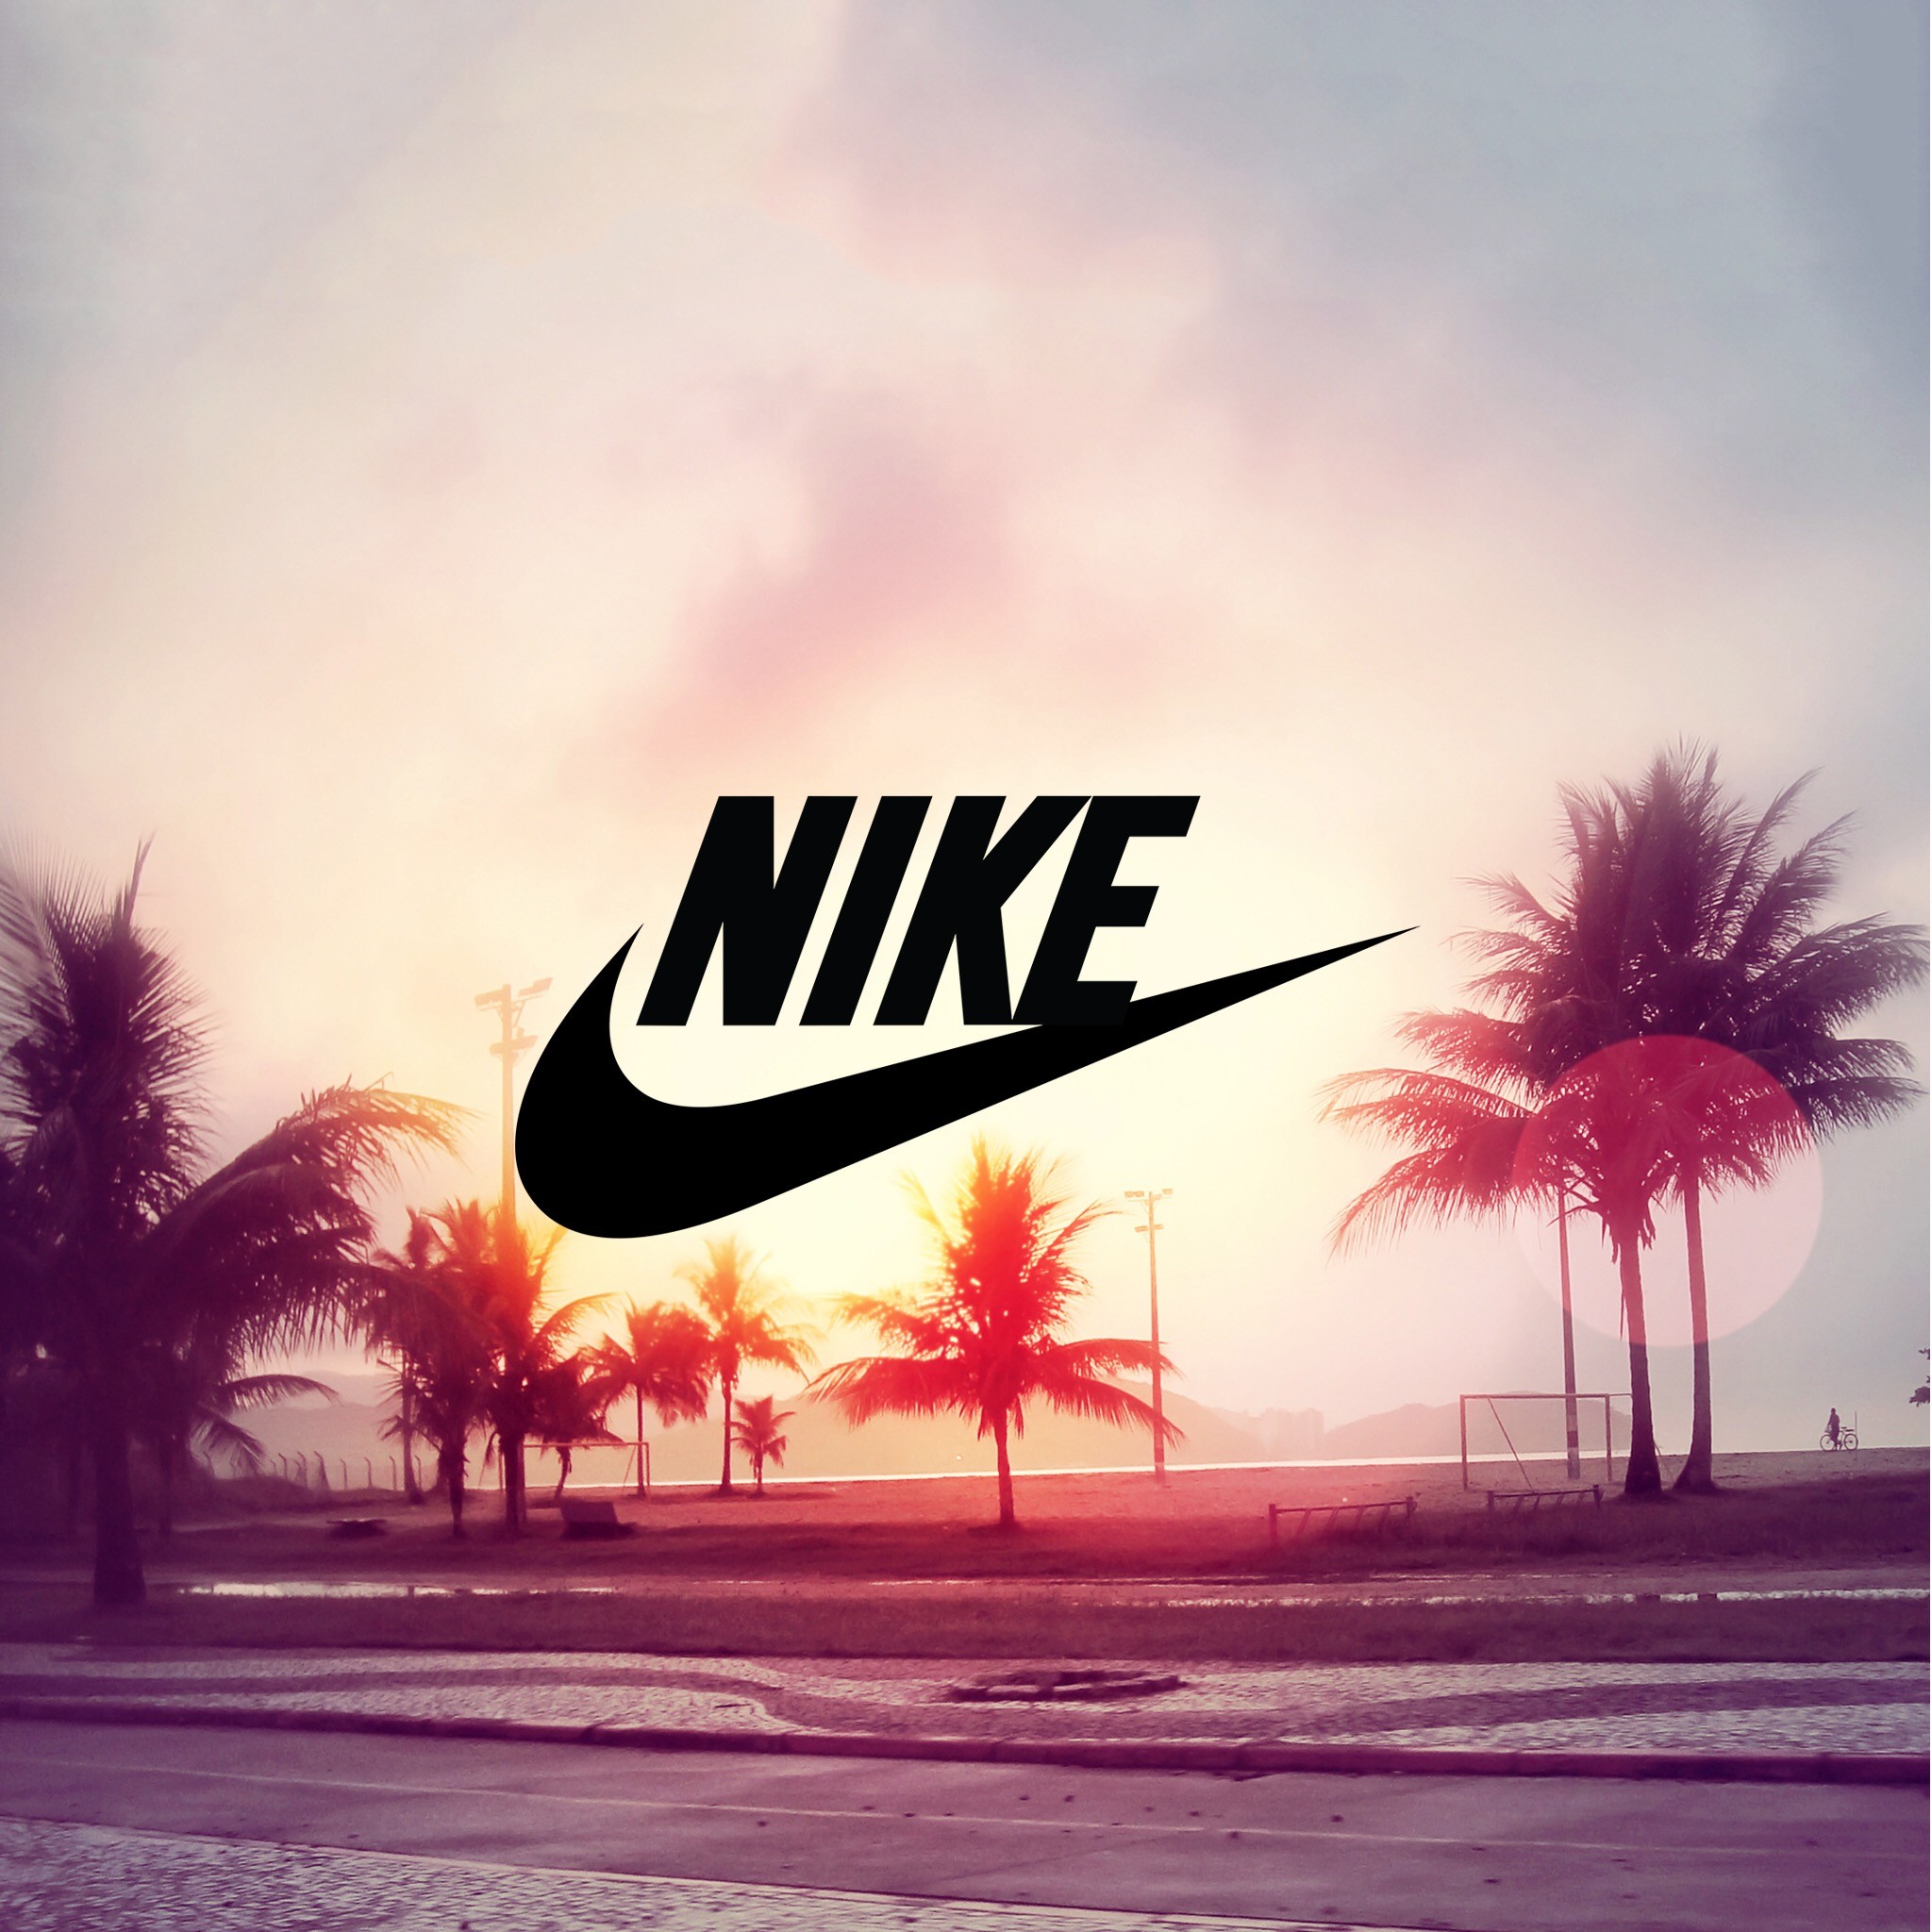 Nike Wallpapers 2018 66 images